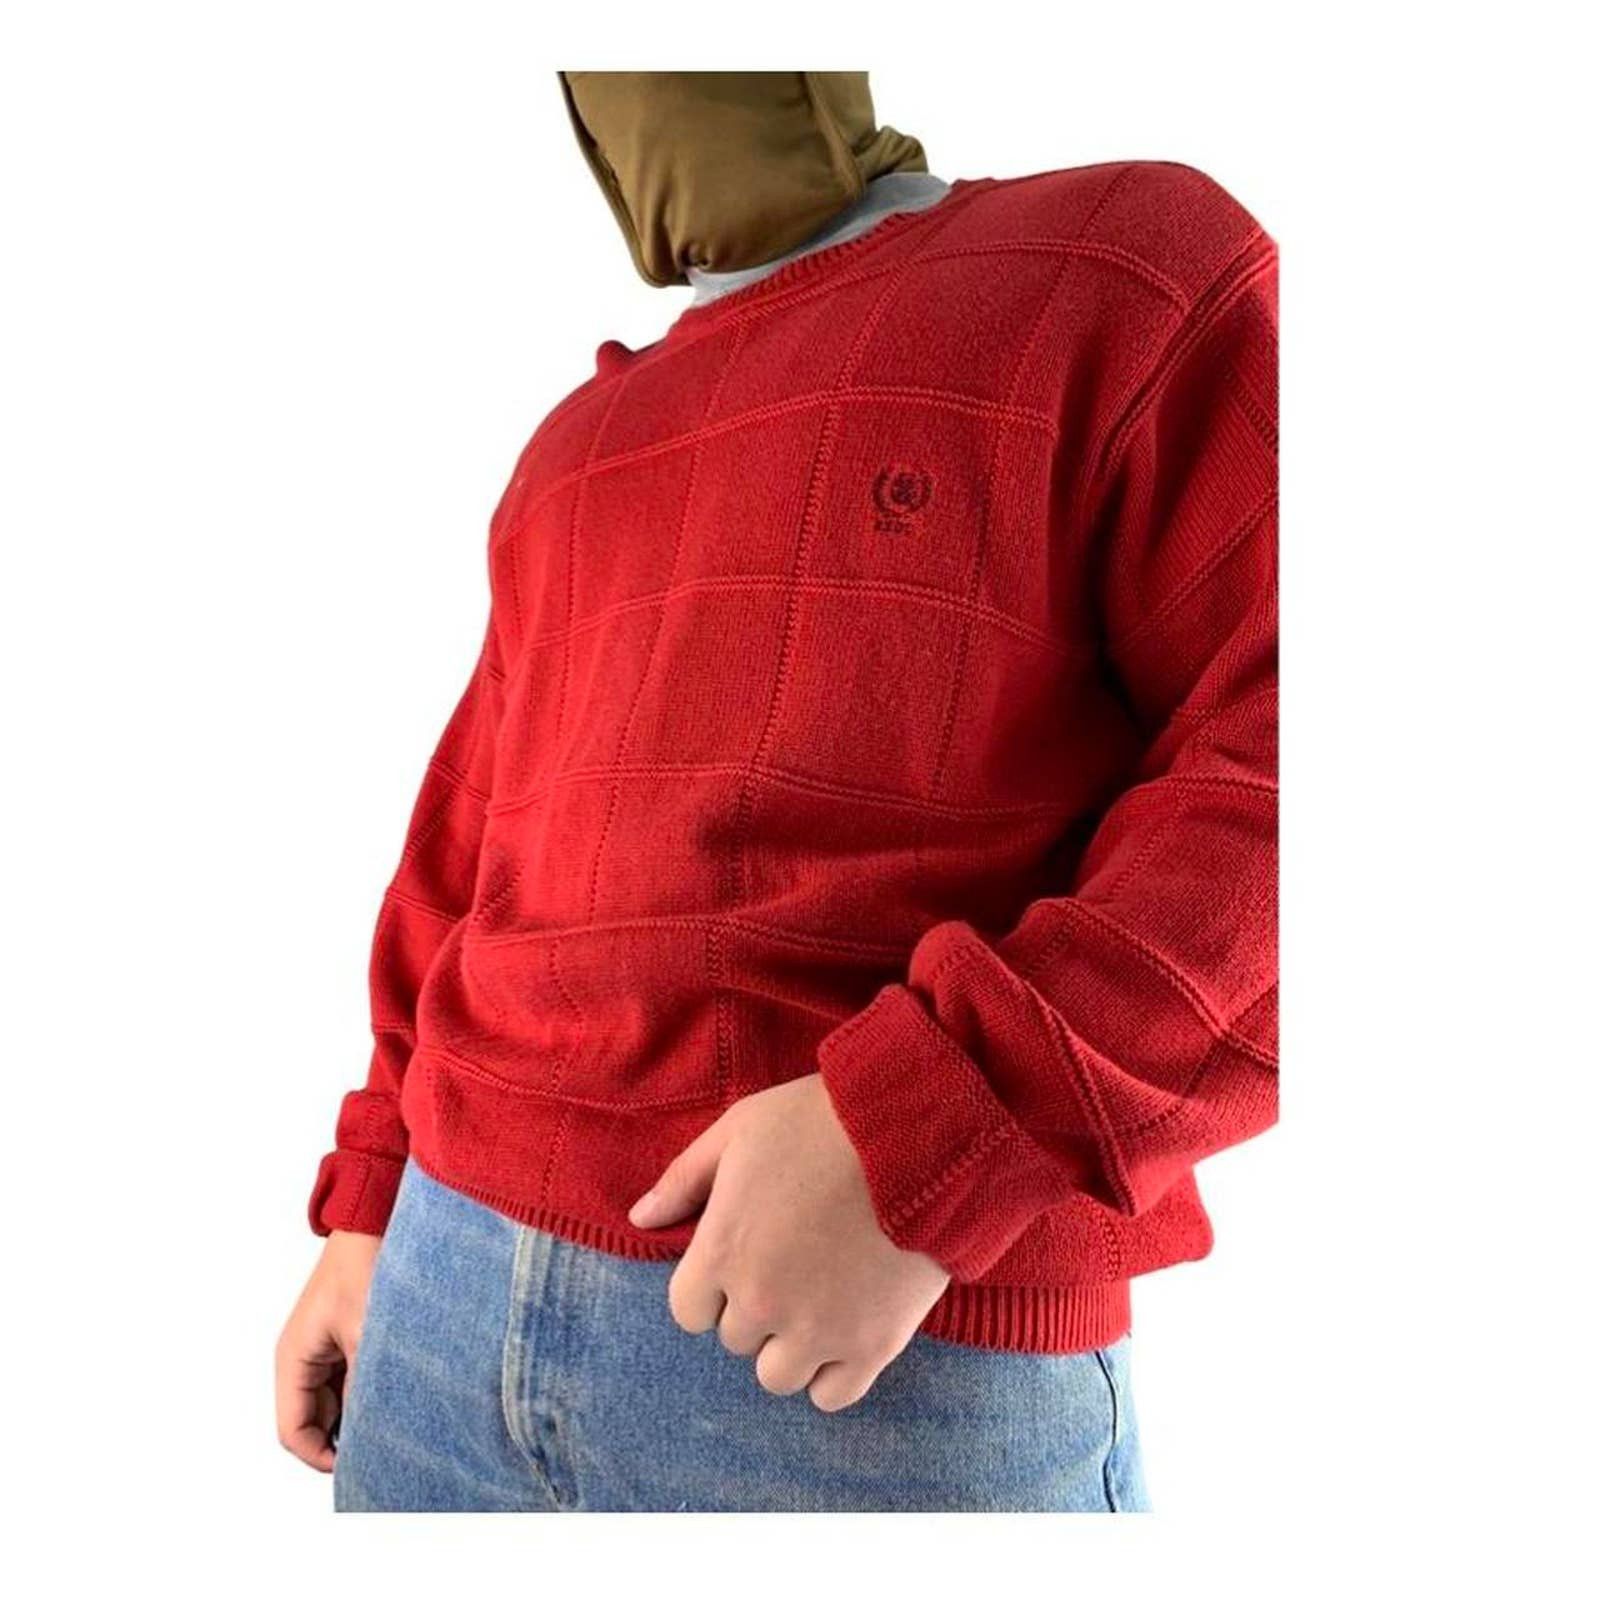 Chaps Vintage 90s Chaps Baggy Red Sweater Size US L / EU 52-54 / 3 - 2 Preview